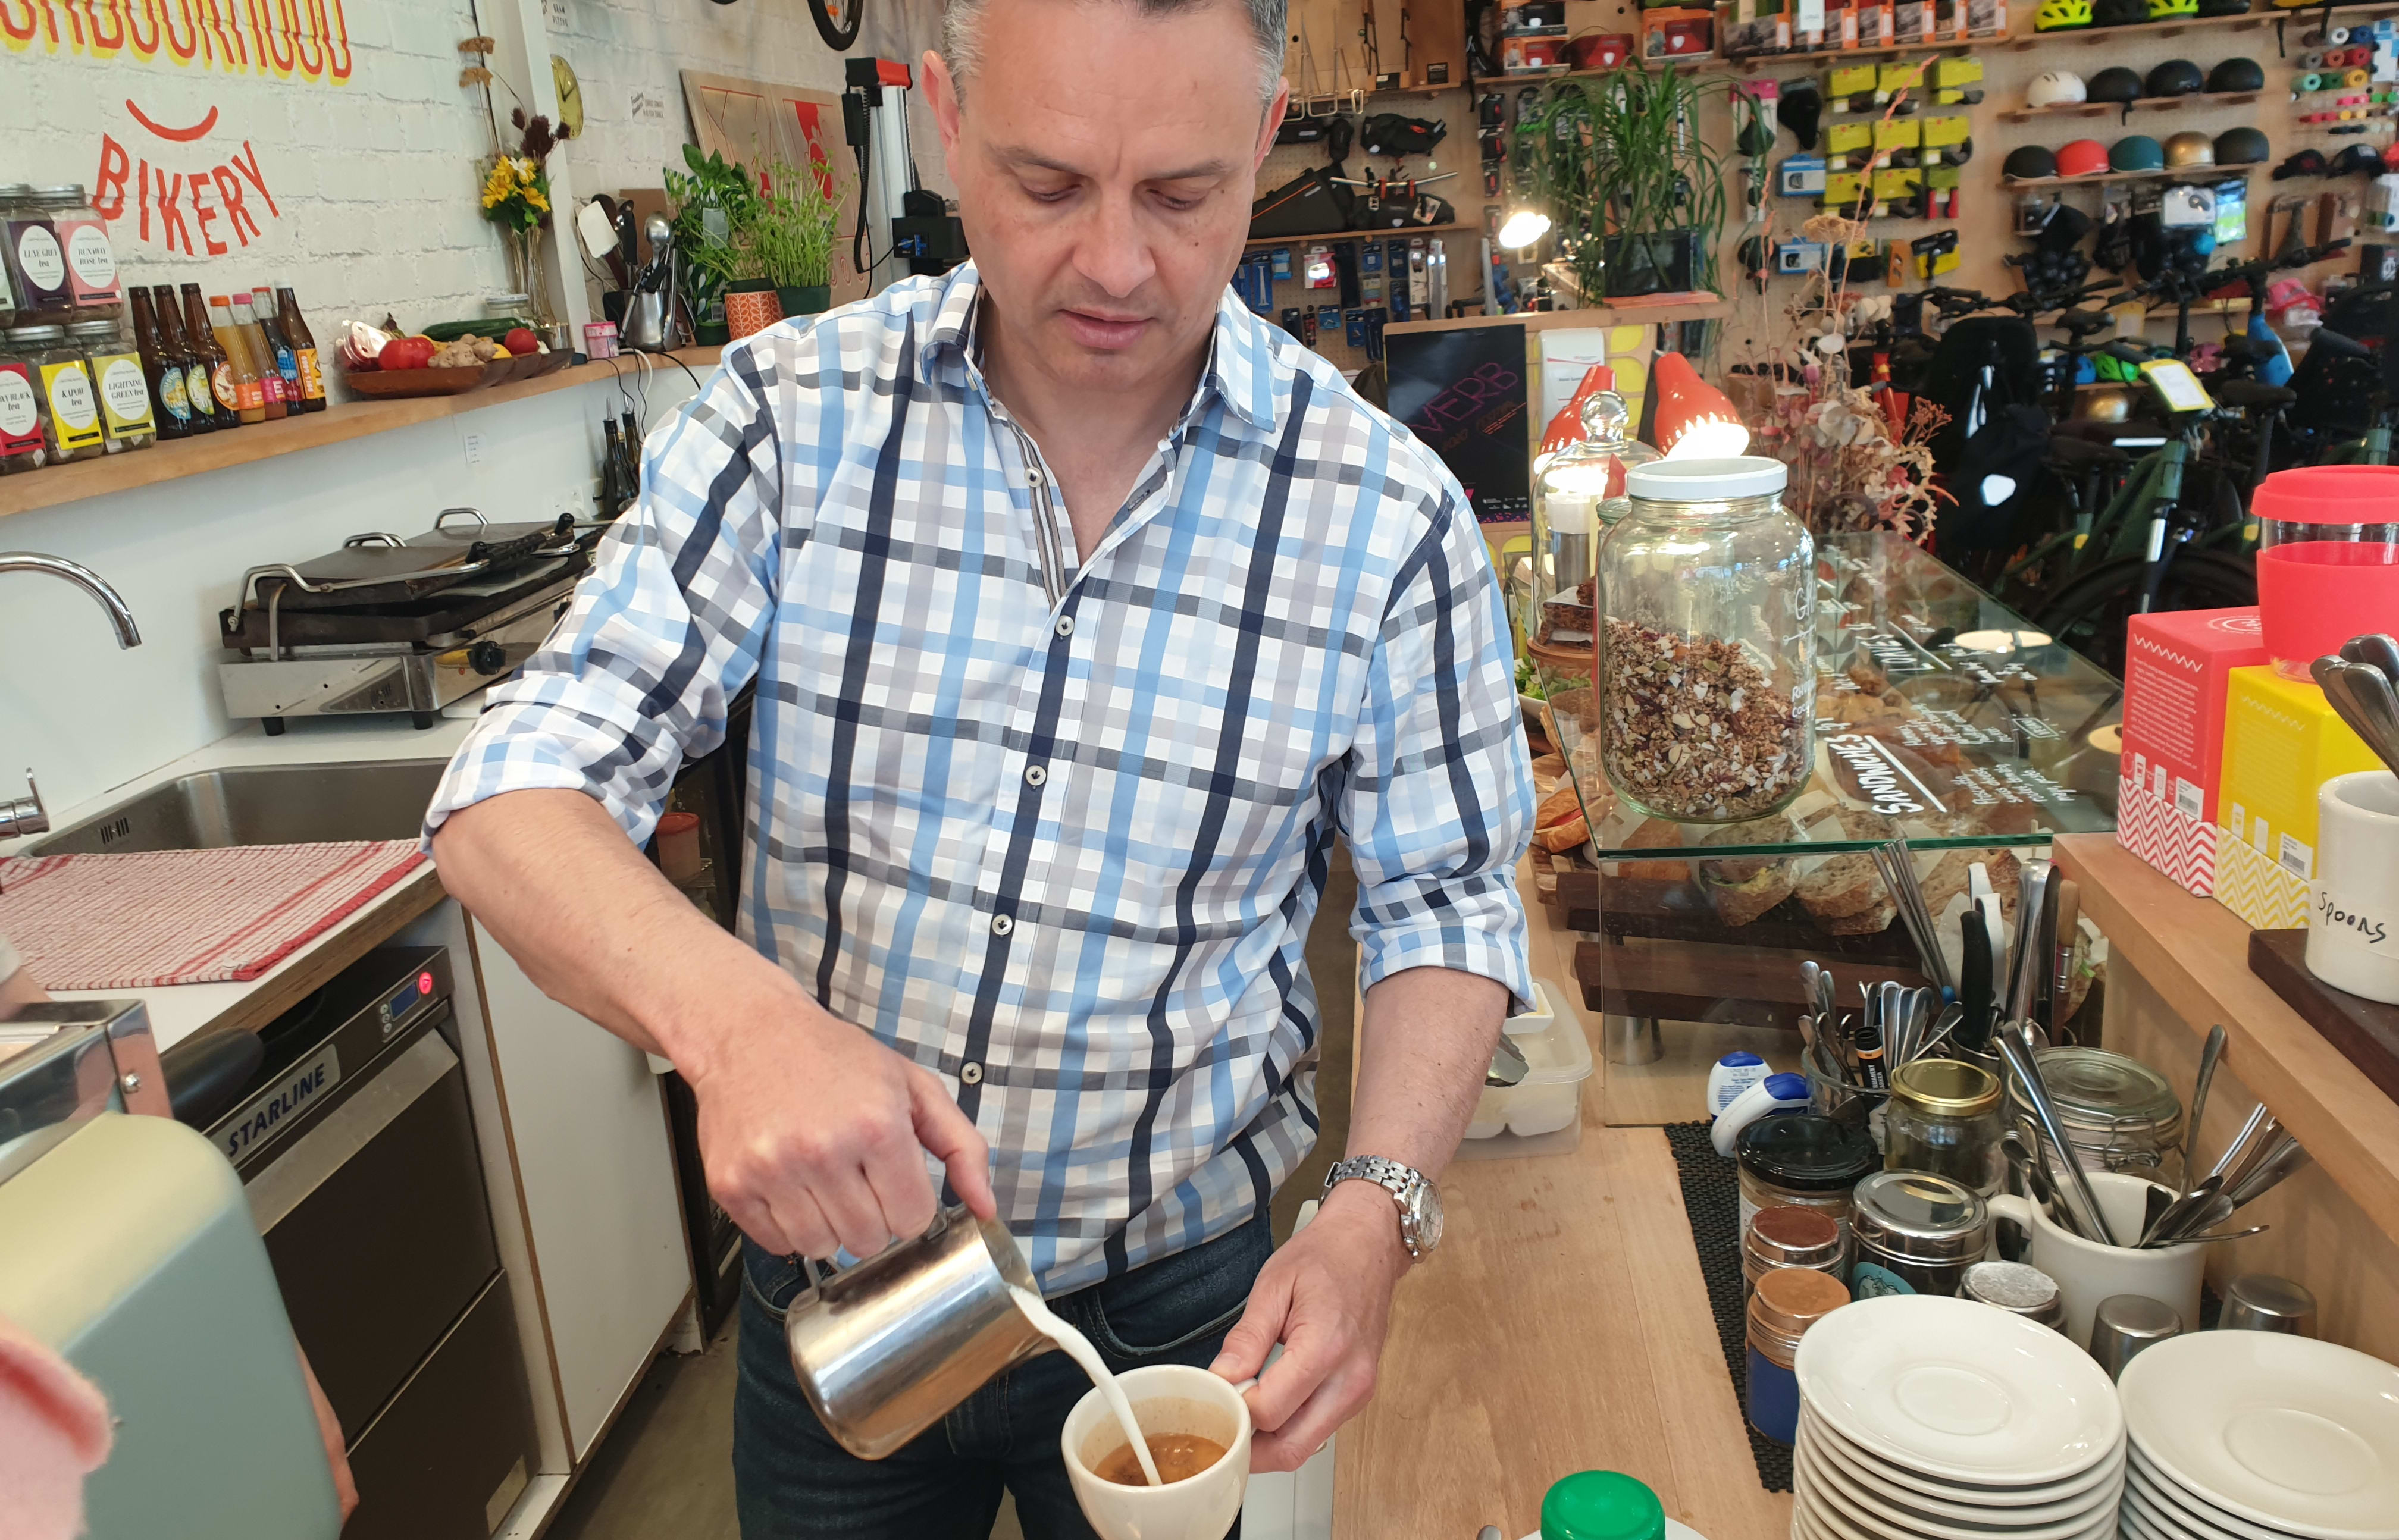 Green Party co-leader James Shaw shows off his barista experience while campaigning on 16 October, 2020.